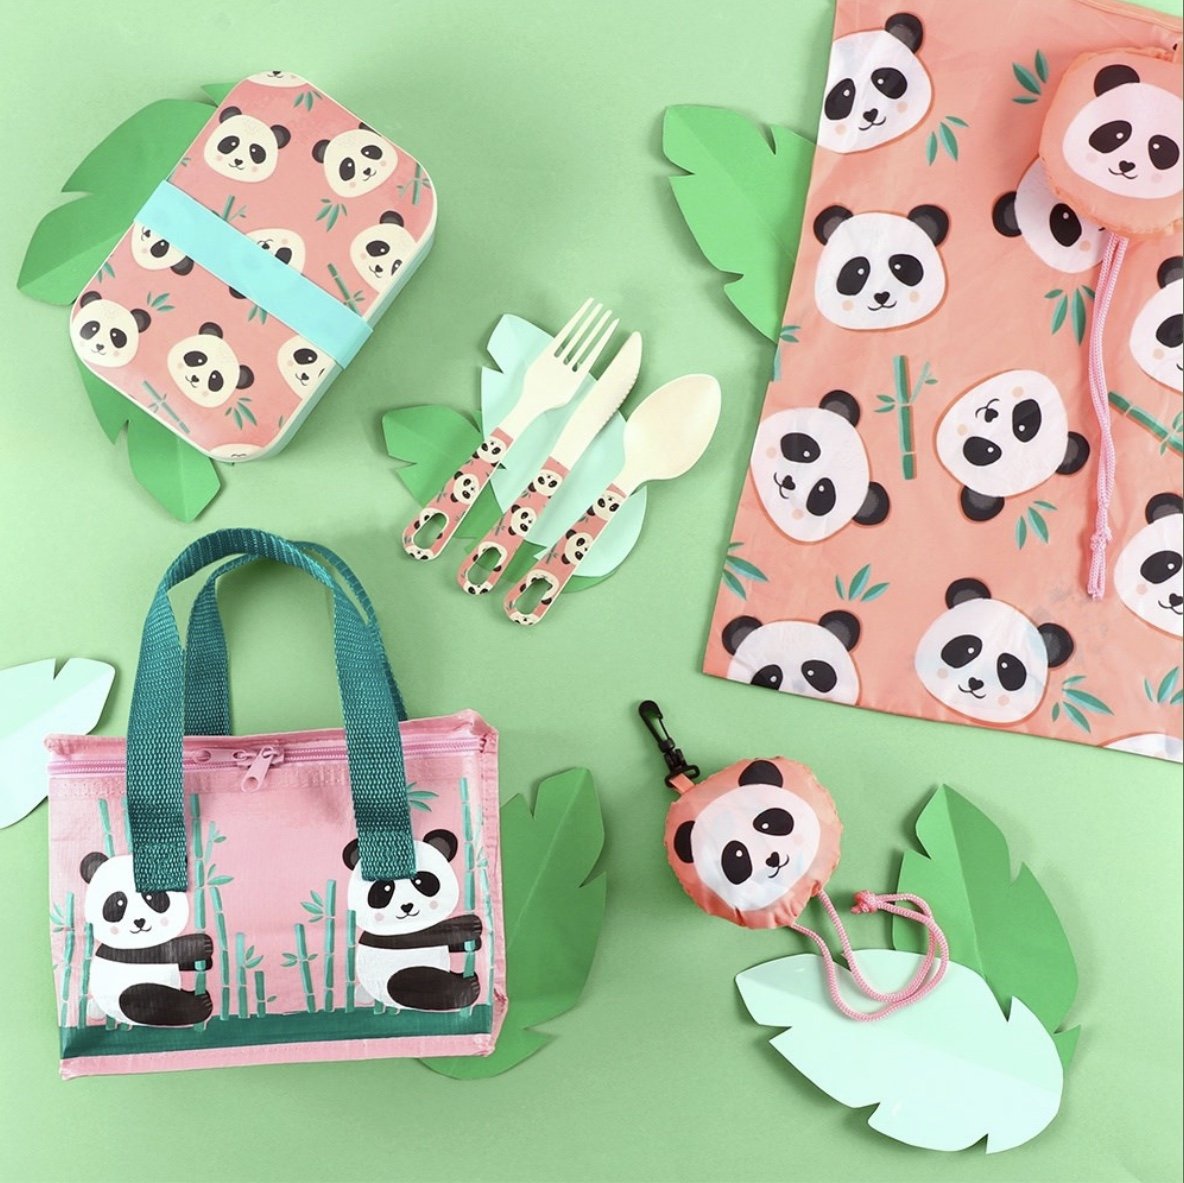 Cute Panda Themed Gifts | Gift Ideas For Girls Kids Personalised Gifts